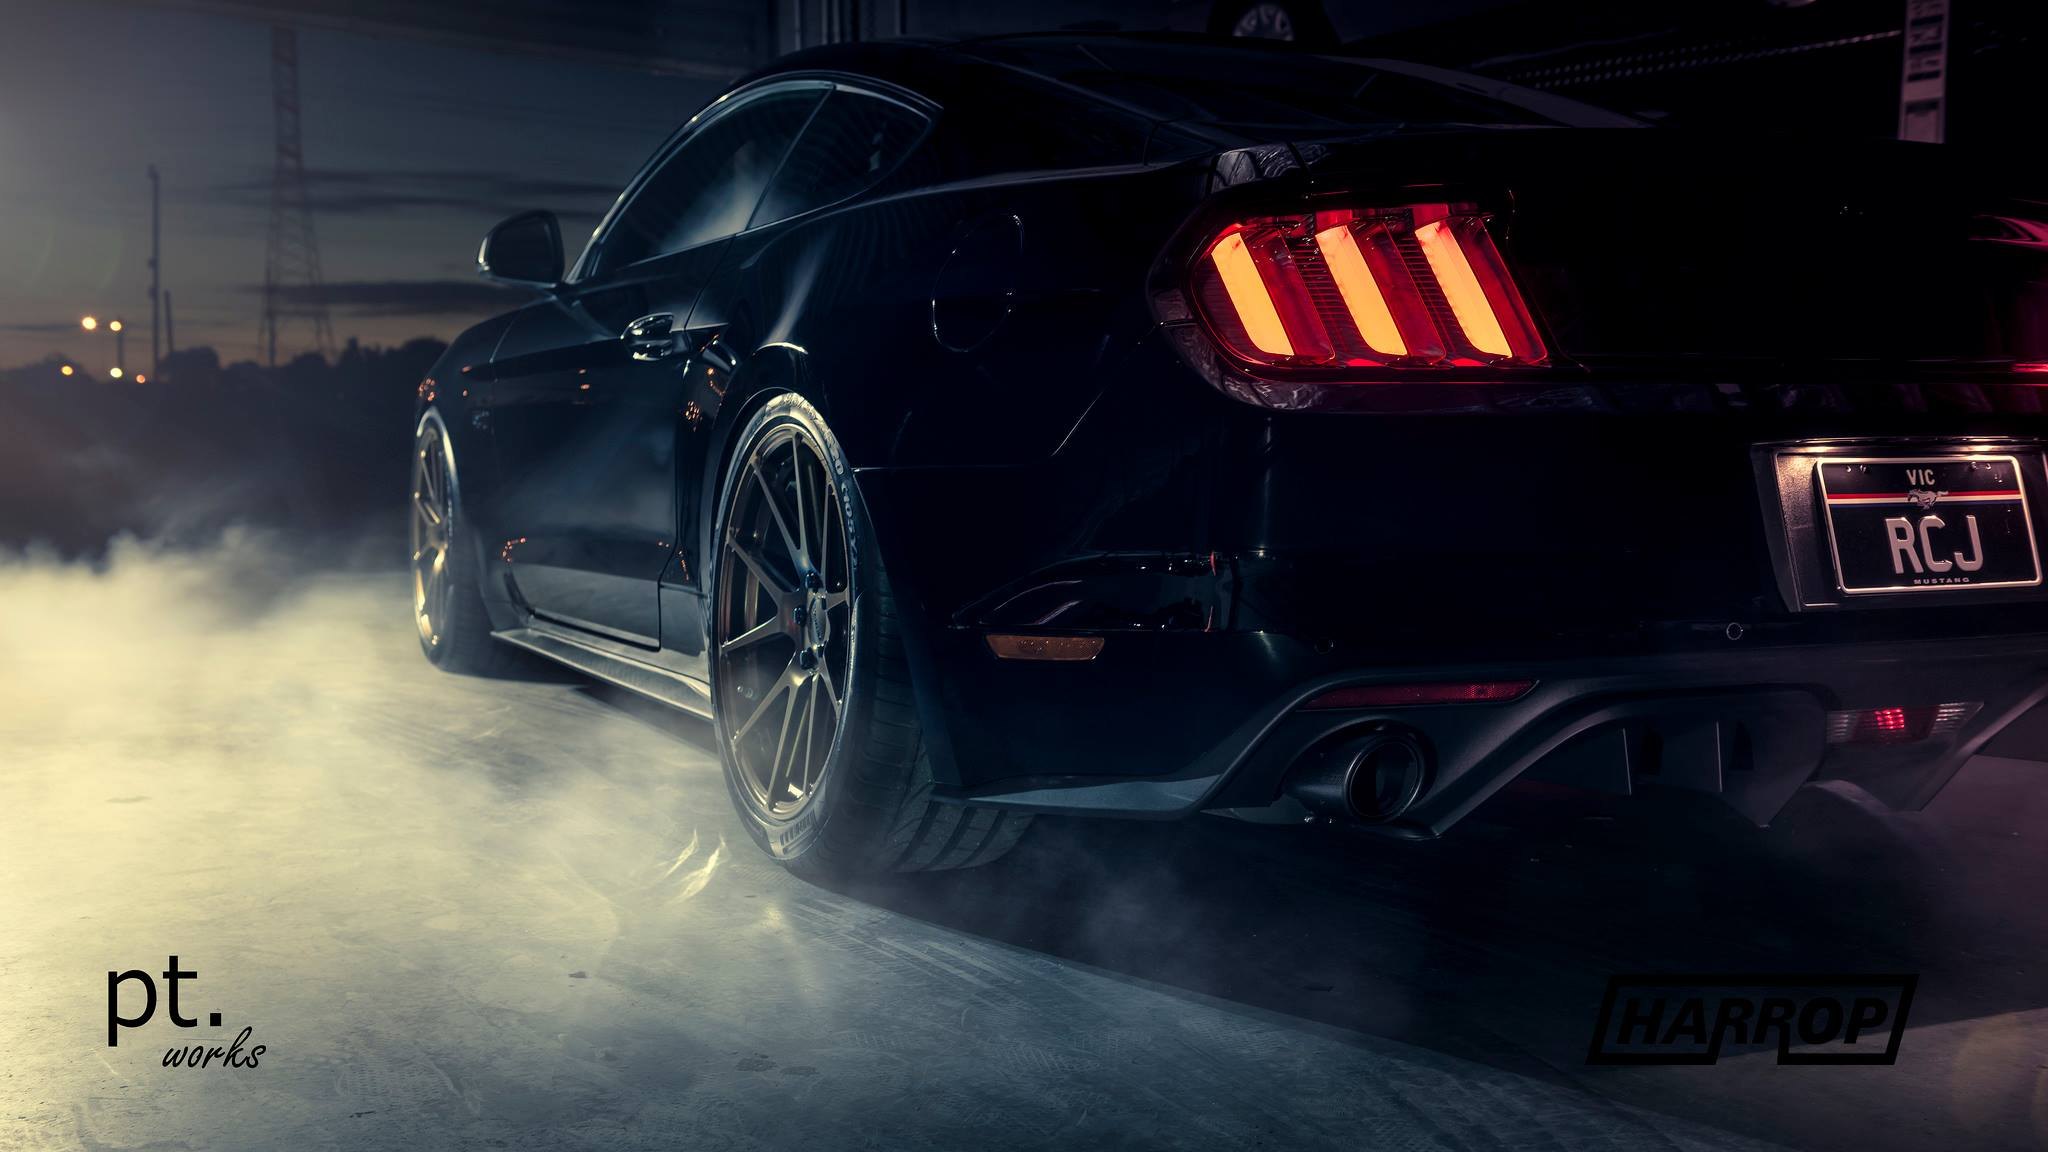 Black Ford Mustang 5.0 with Red LED Taillights - Photo by PT works